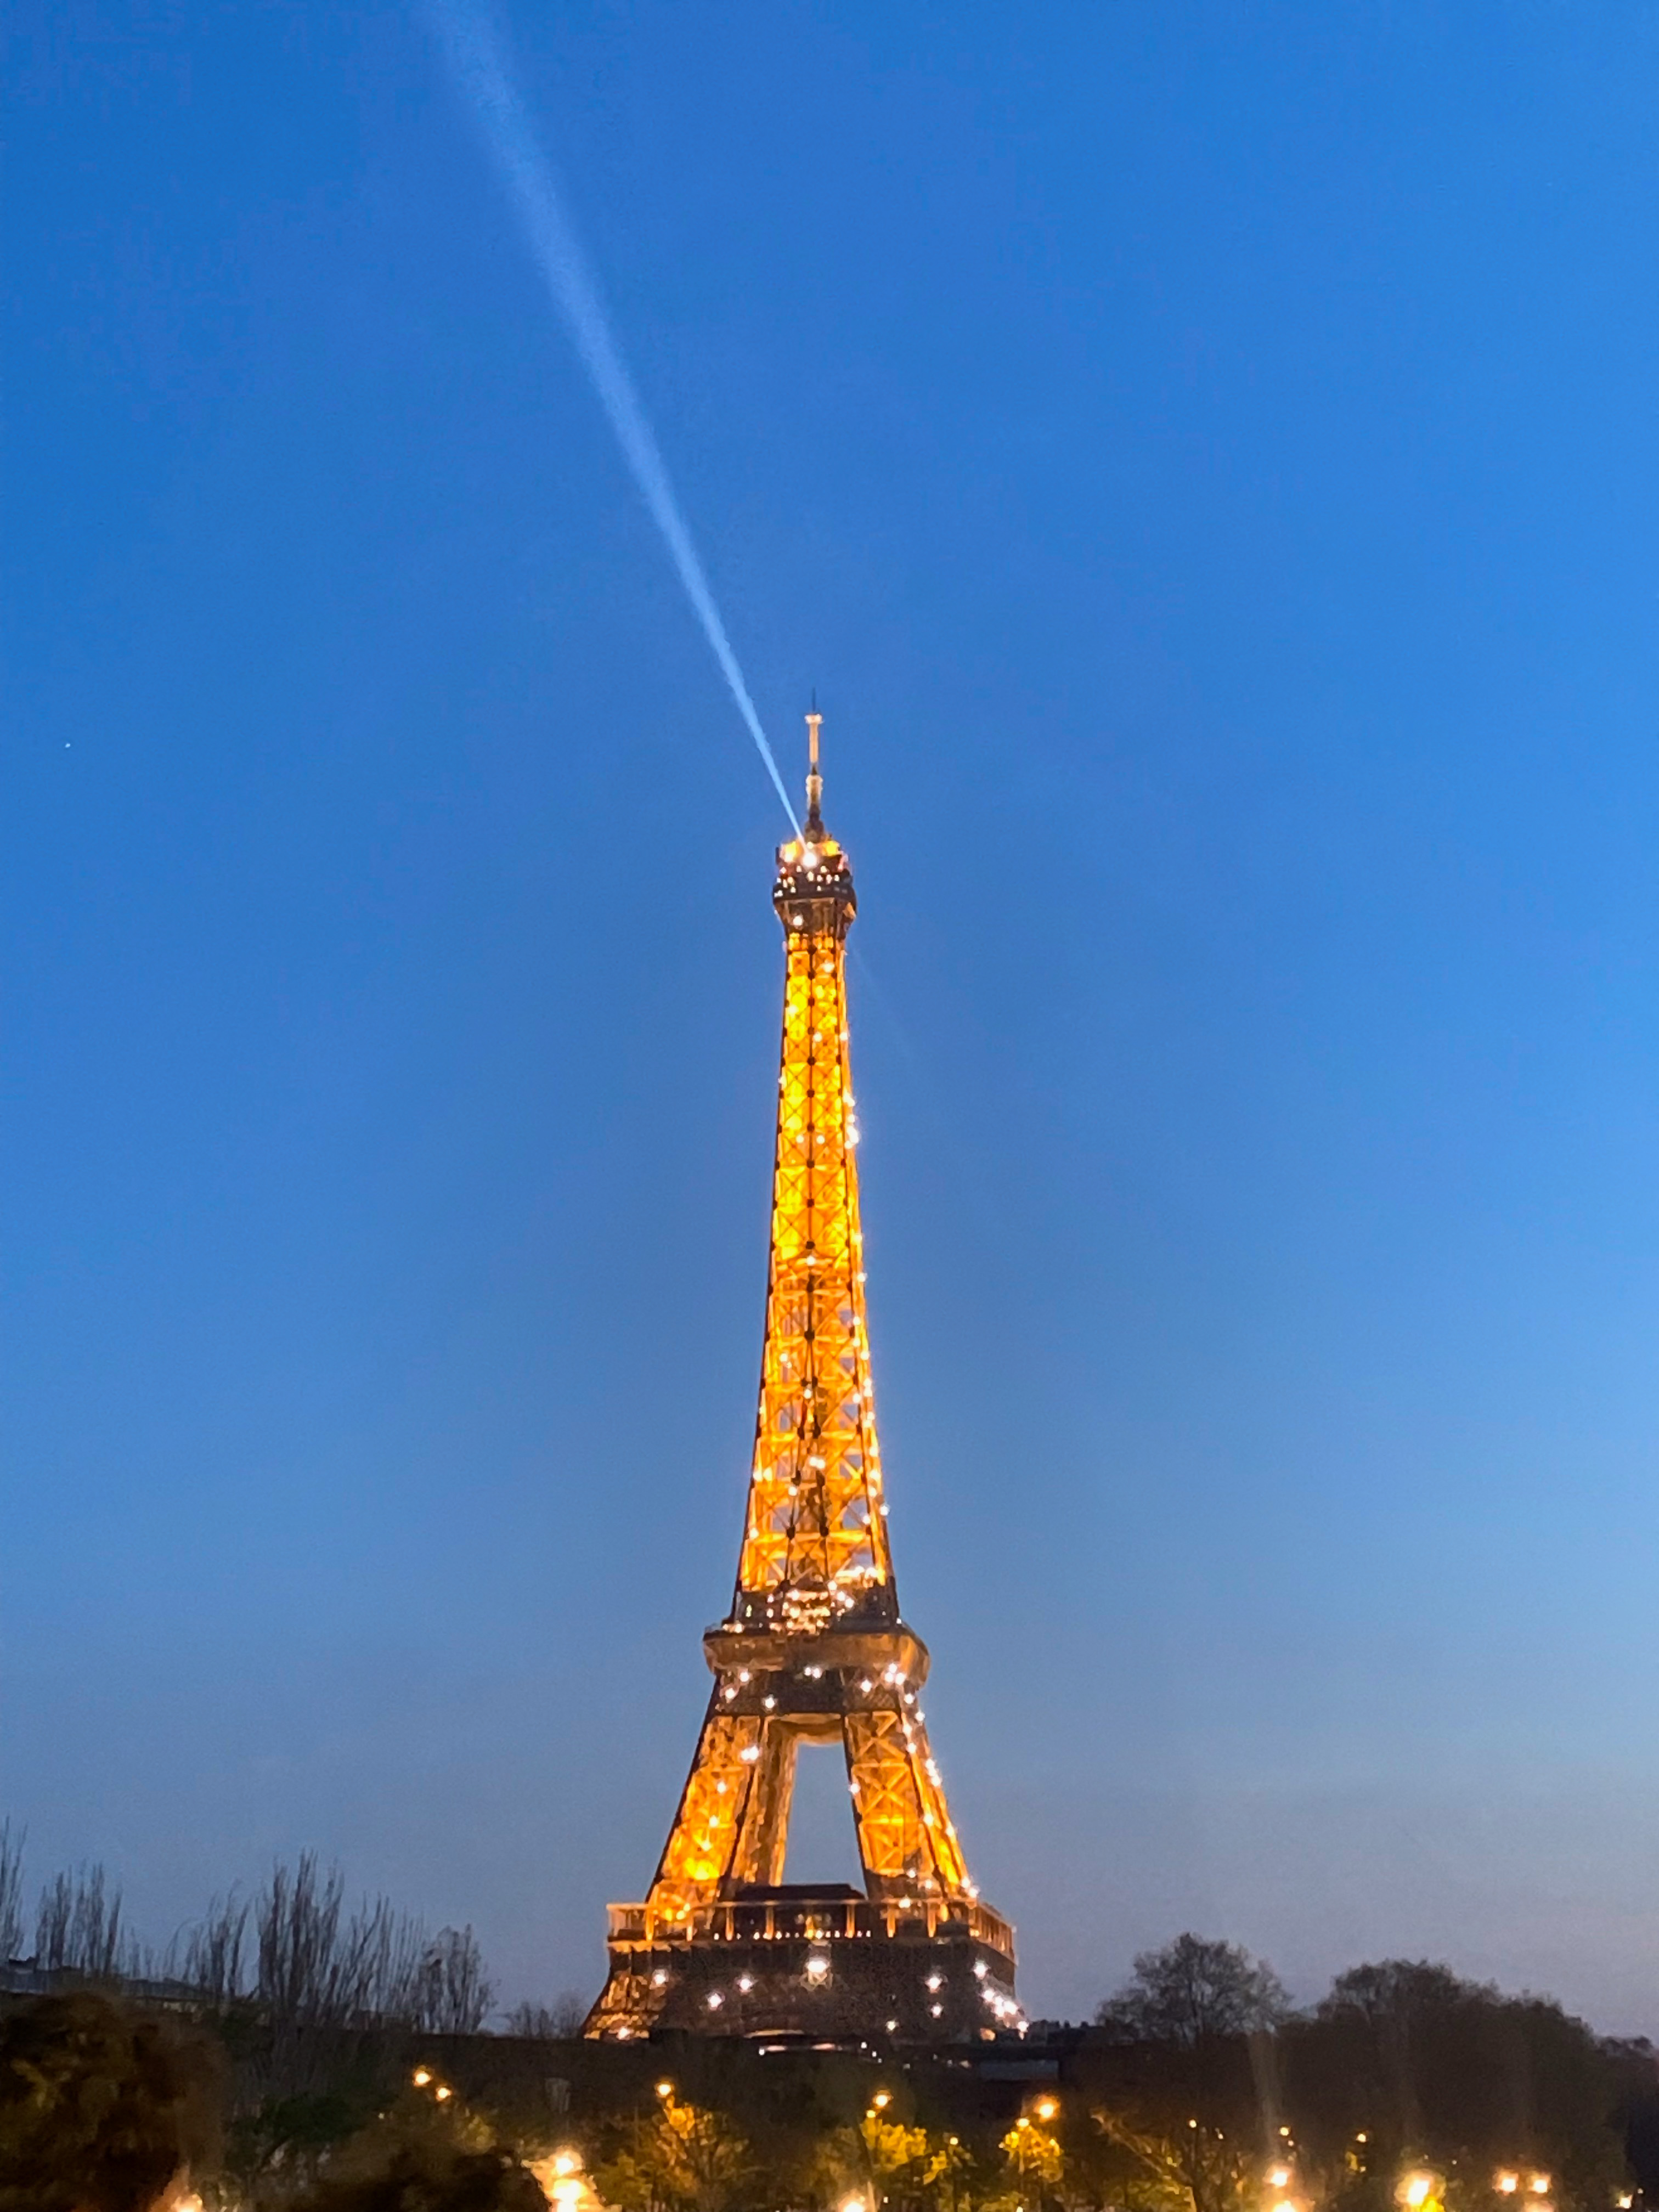 Lit Eiffel Tower in the evening with a blue sky